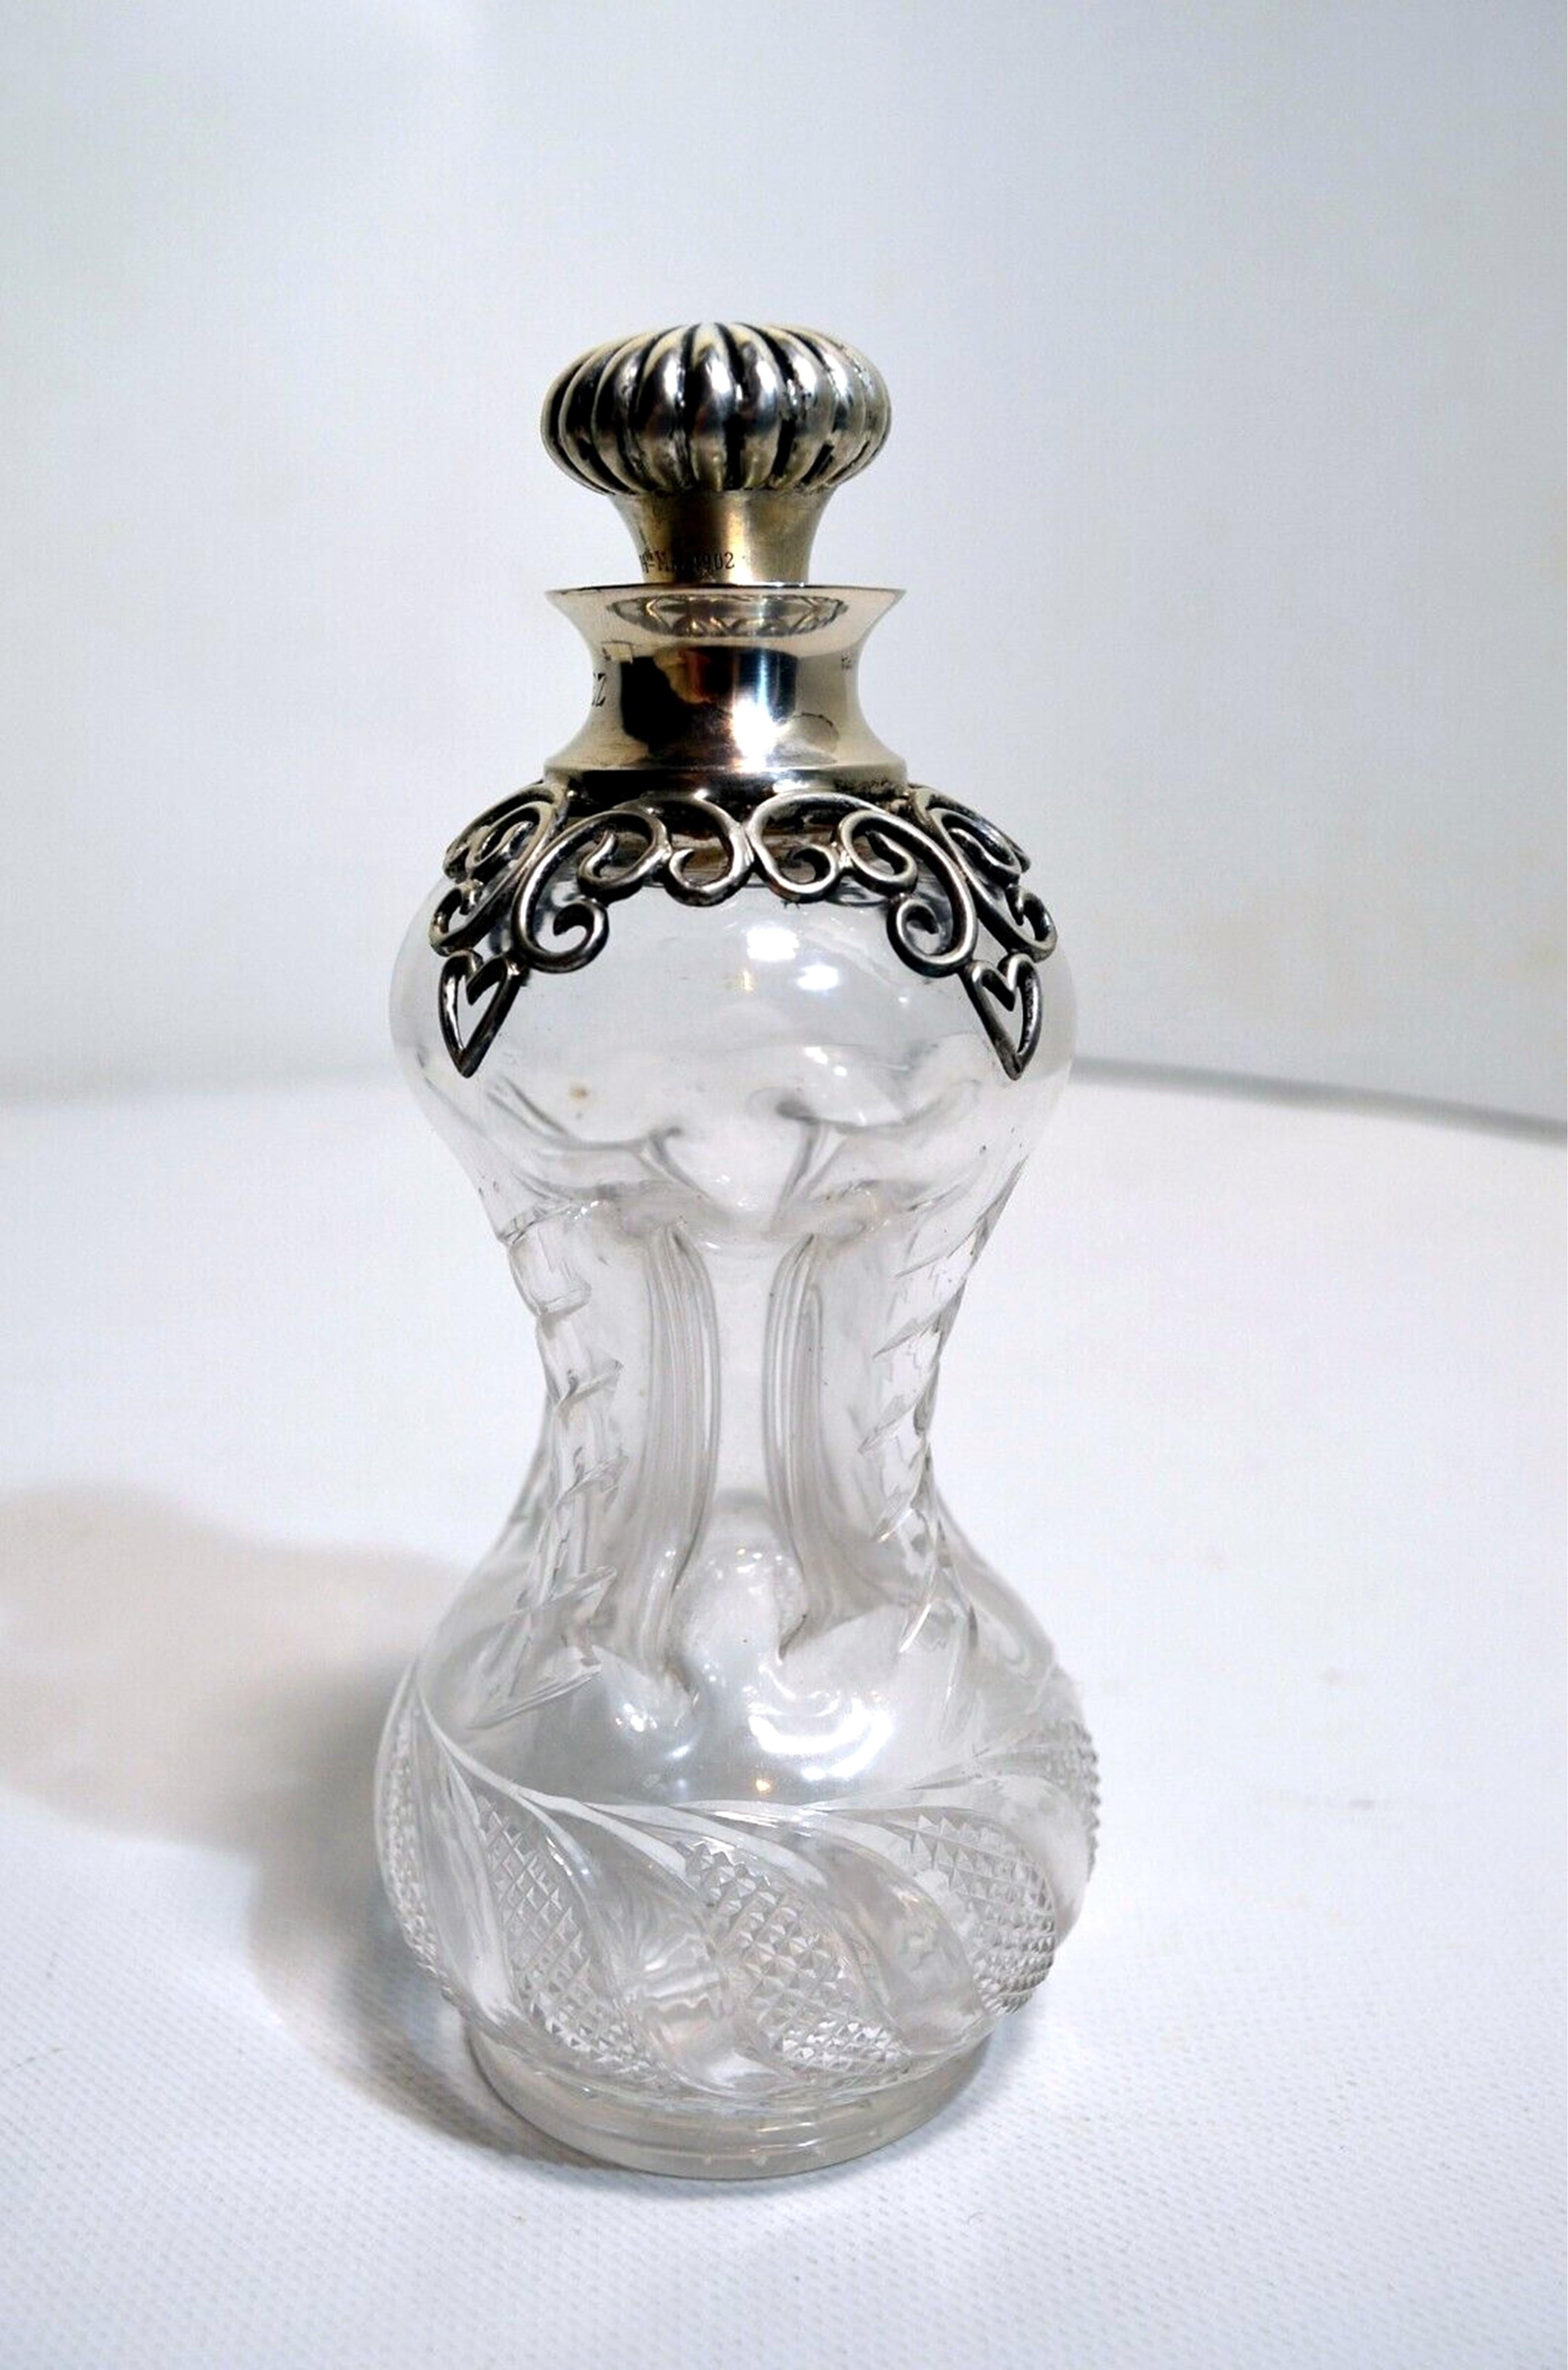 Very beautiful glug glug decanter bottle in cut crystal and solid English silver. The bottom of the bottle cut with a diamond-tipped twisted wheel. A star is engraved under the base. The setting is in silver marked London 1895. The goldsmith's mark